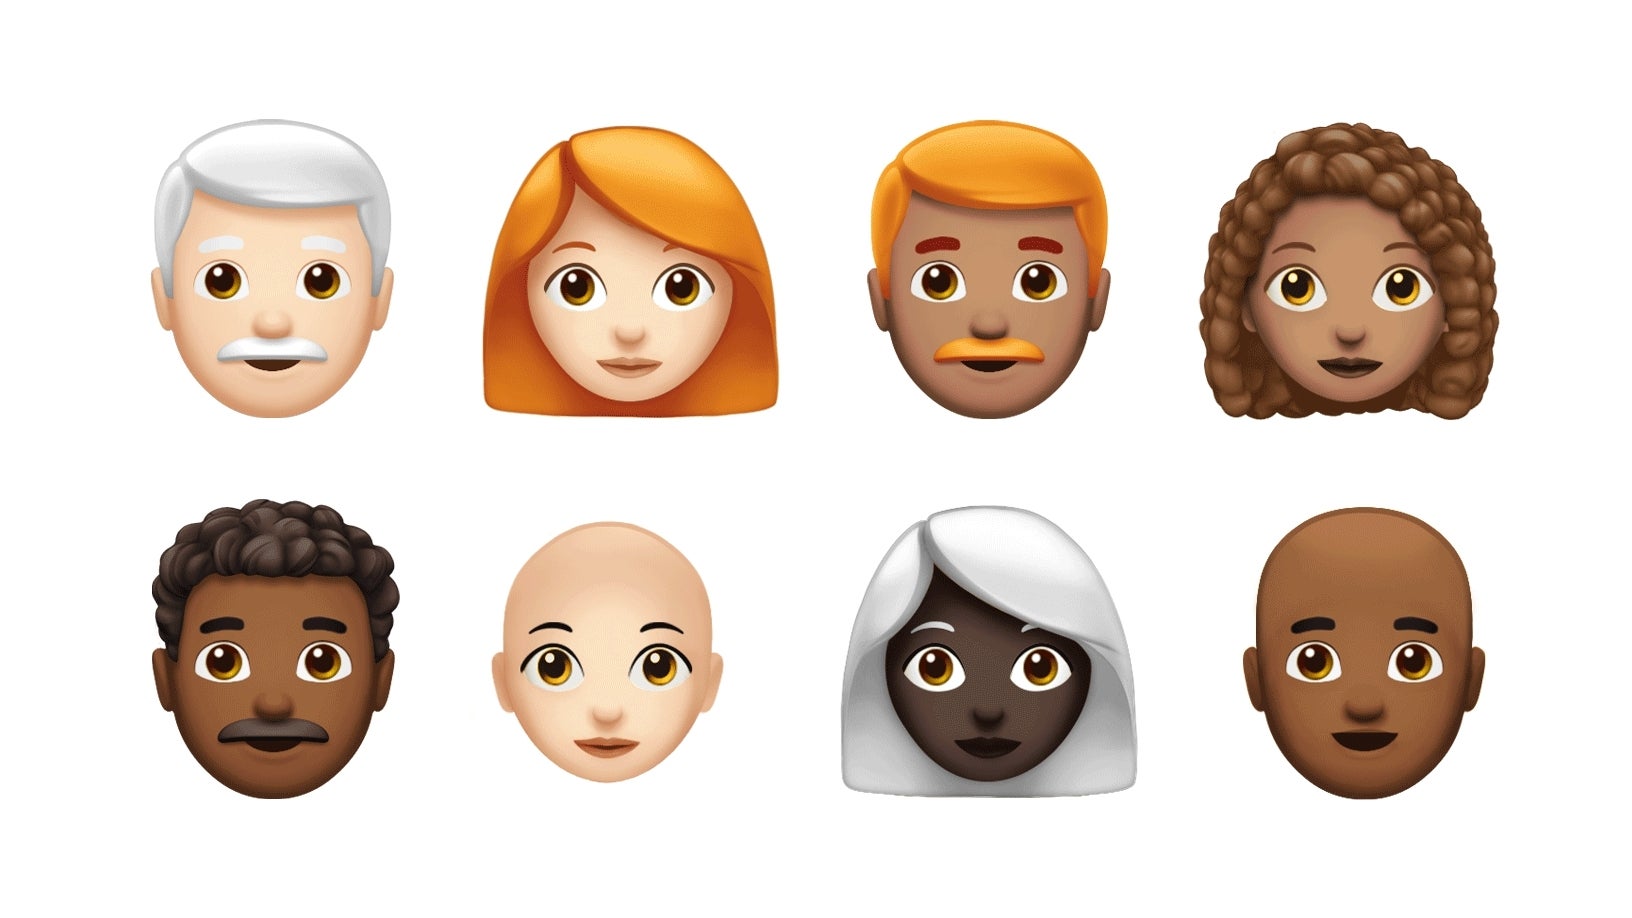 Apple plans to release a bunch of new emojis later this year - See all the new emoji that Apple is planning to launch later this year